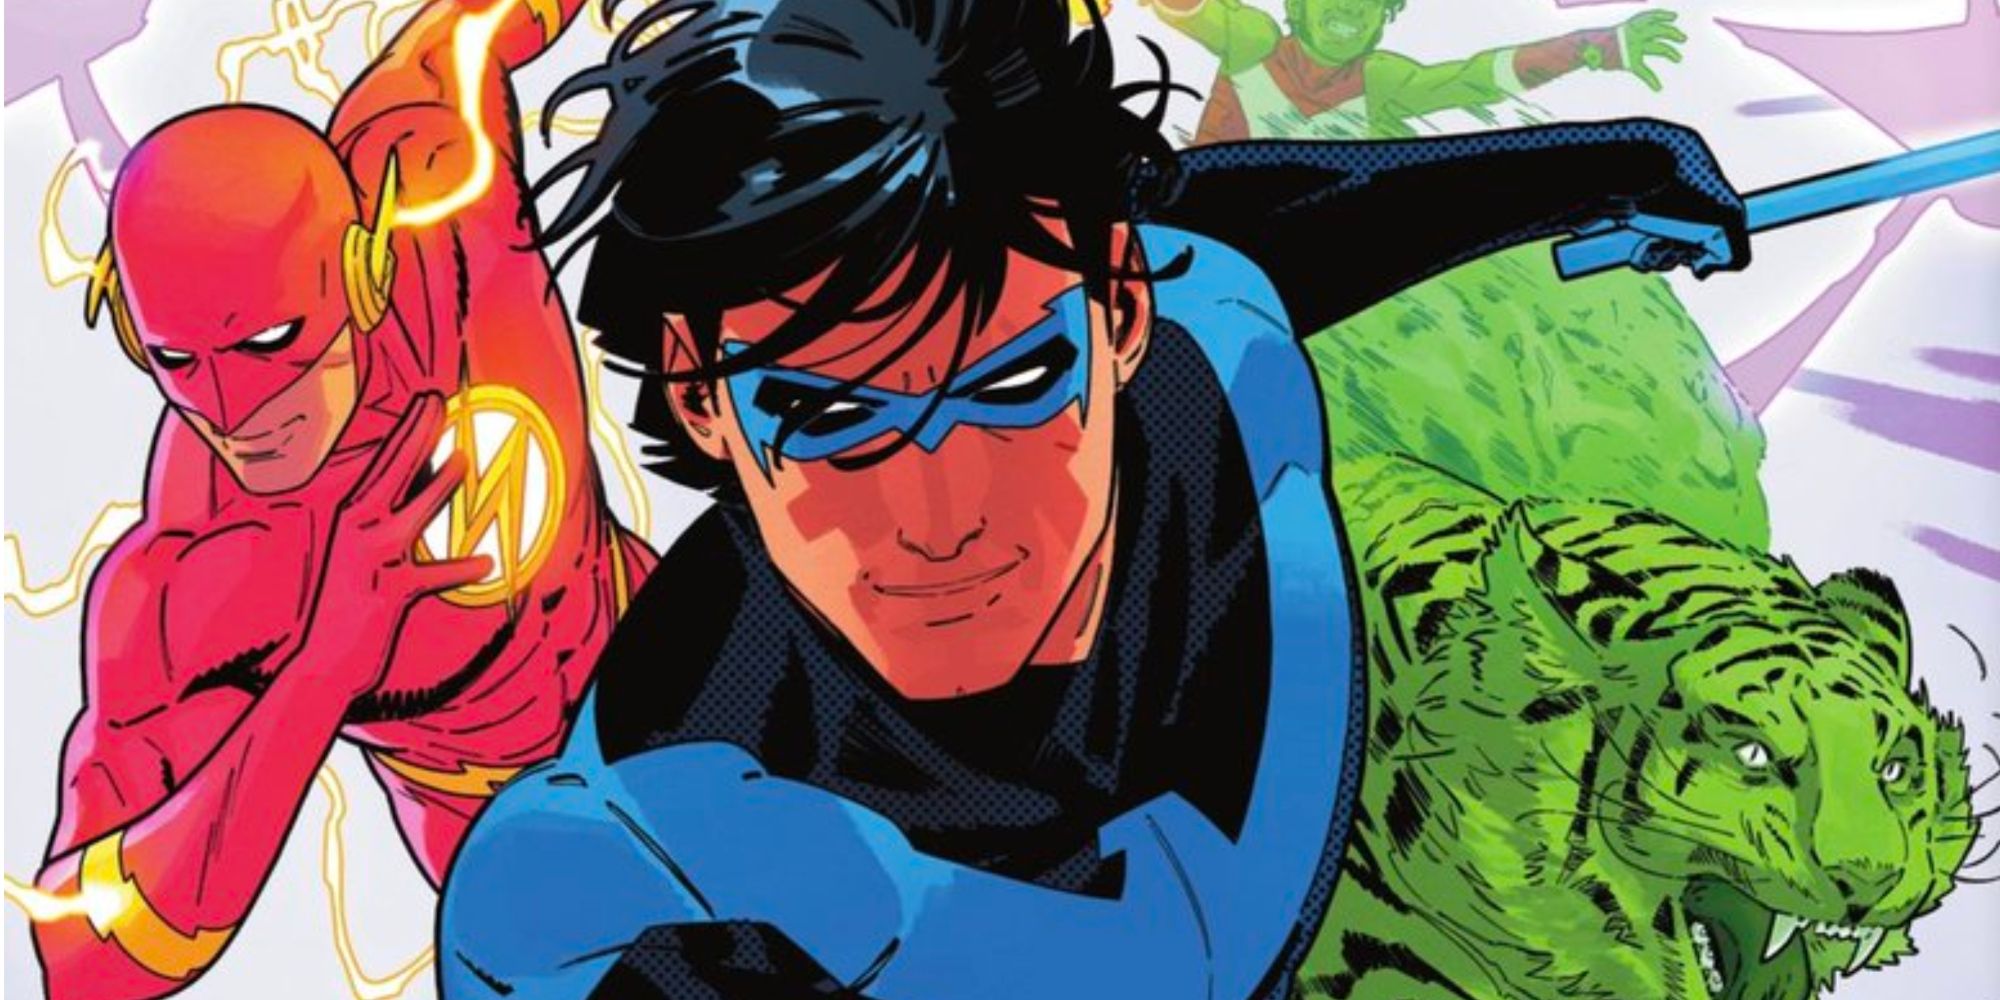 Nightwing and the Teen Titans, including Wally West and Beast Boy